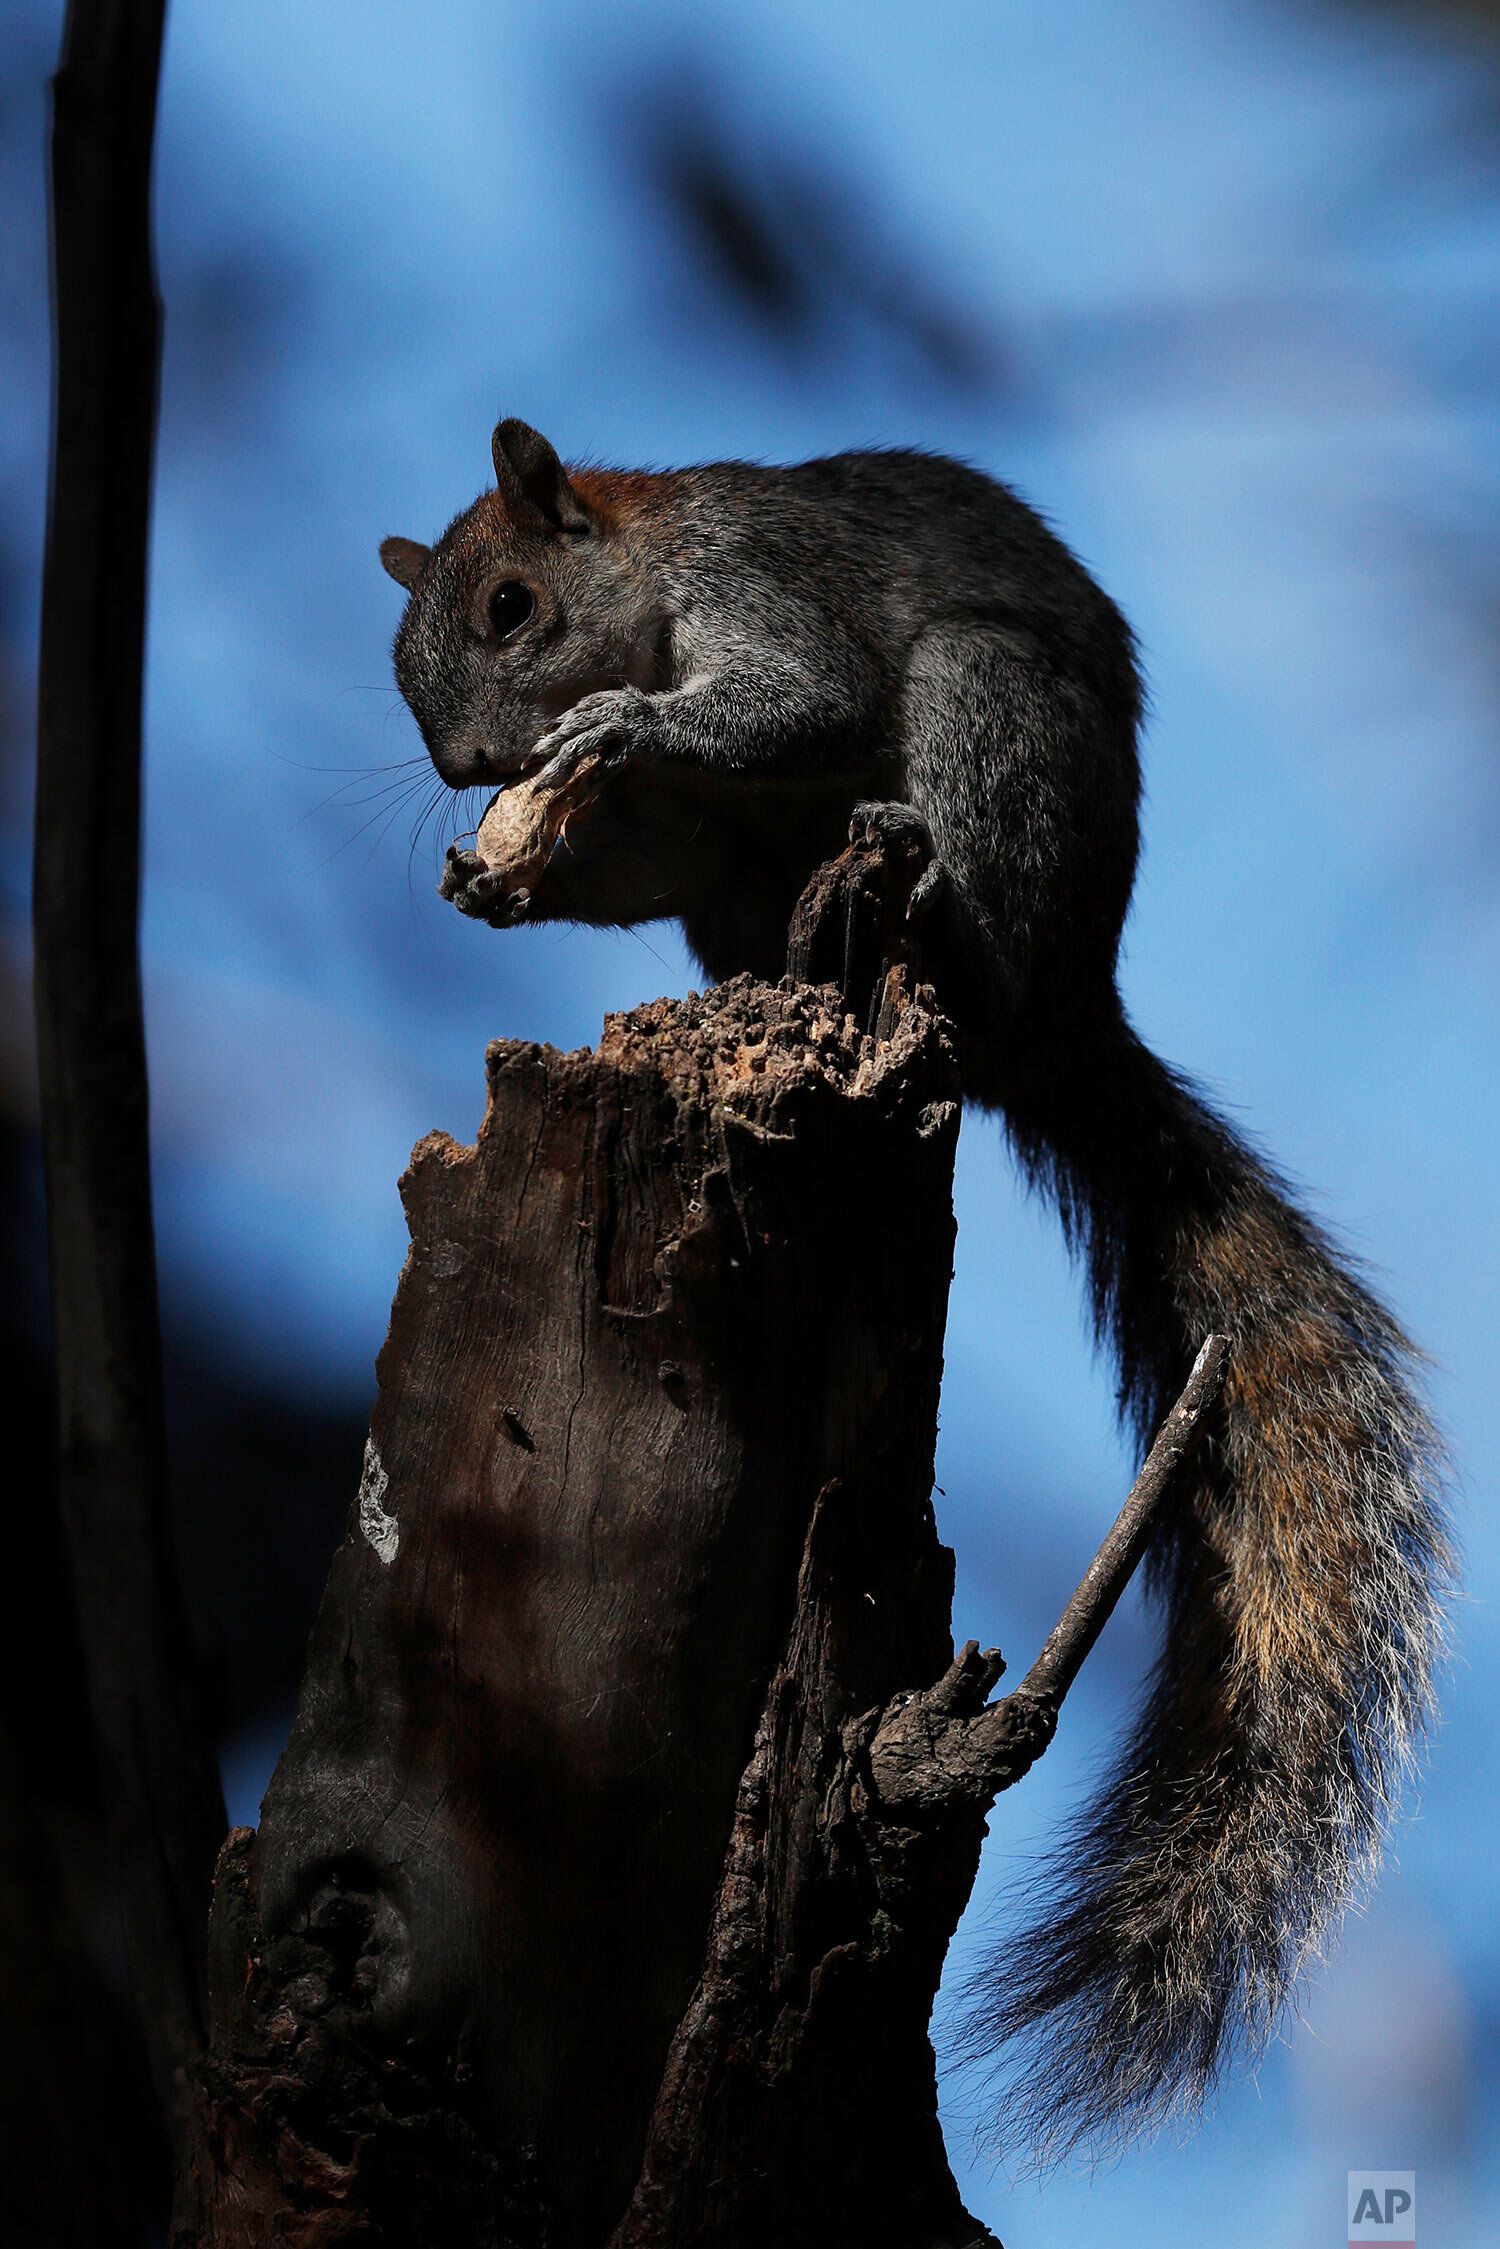  A squirrel nibbles on the shell of a peanut while perched on a tree stump, in the San Juan de Aragon Park, in Mexico City, Tuesday, Feb. 4, 2020. (AP Photo/Marco Ugarte) 